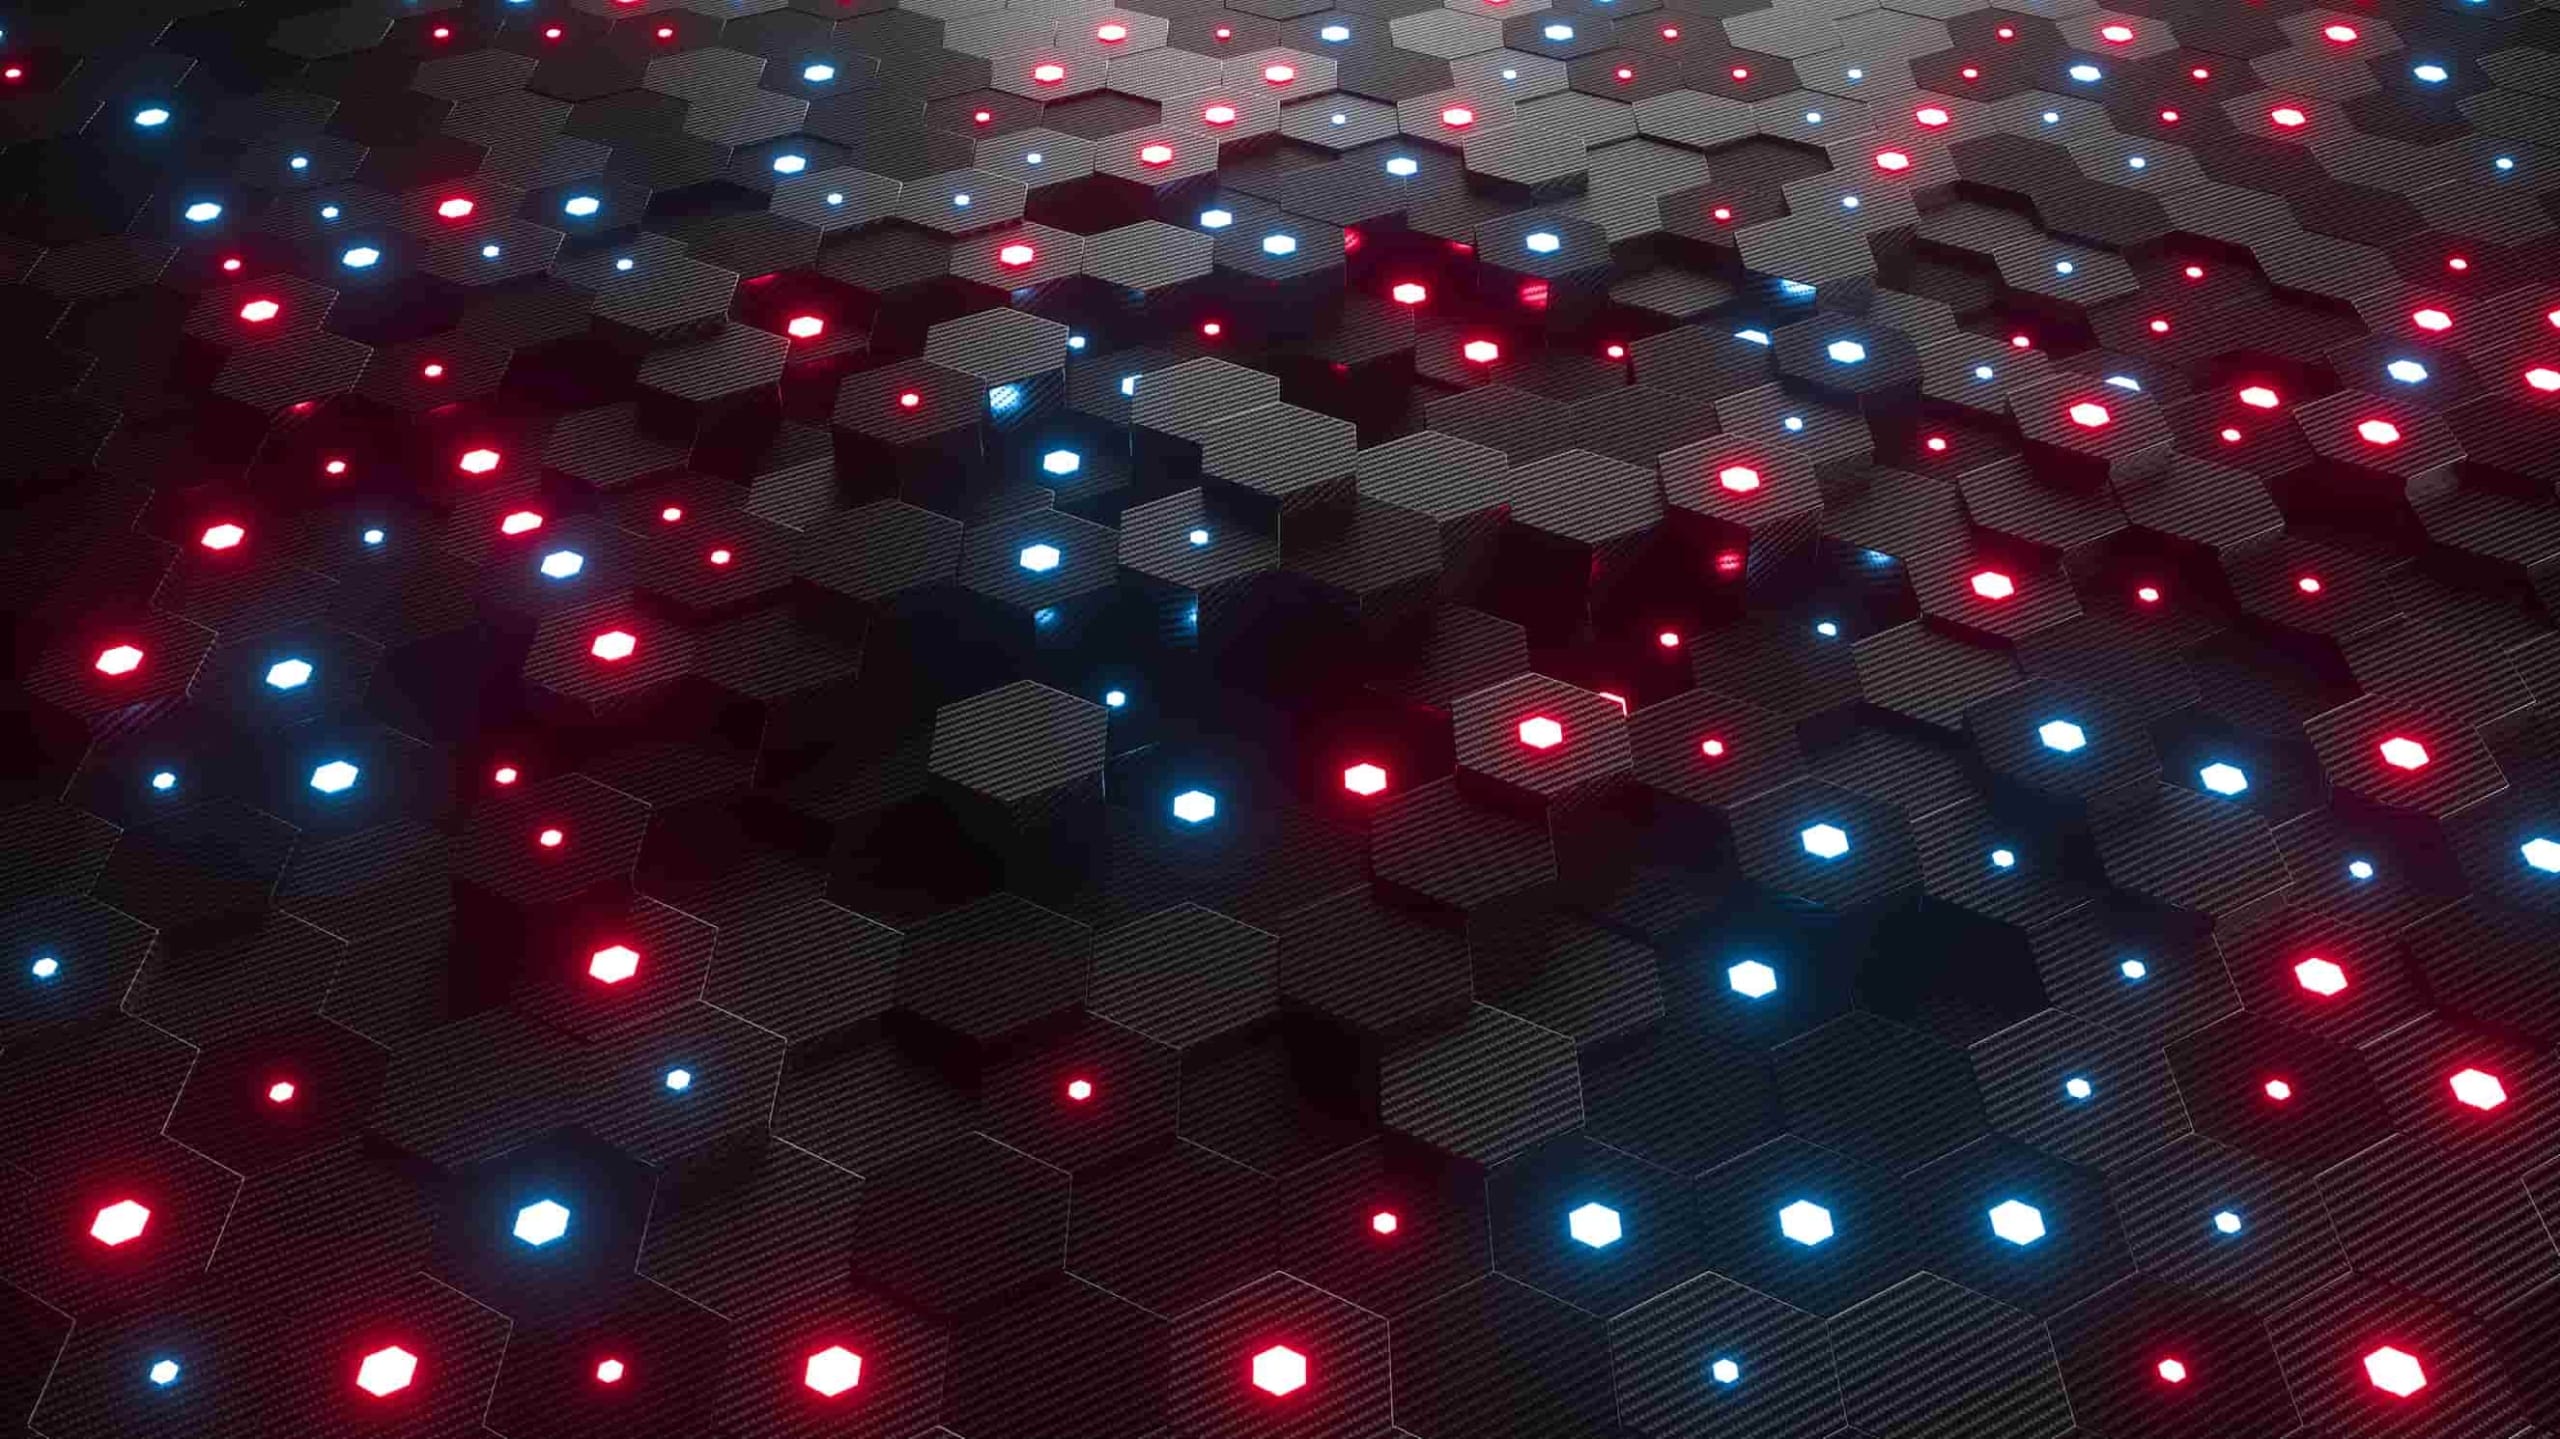 Abstract image of a hexagonal pattern surface illuminated by blue and red led lights, creating a futuristic and technological appearance.